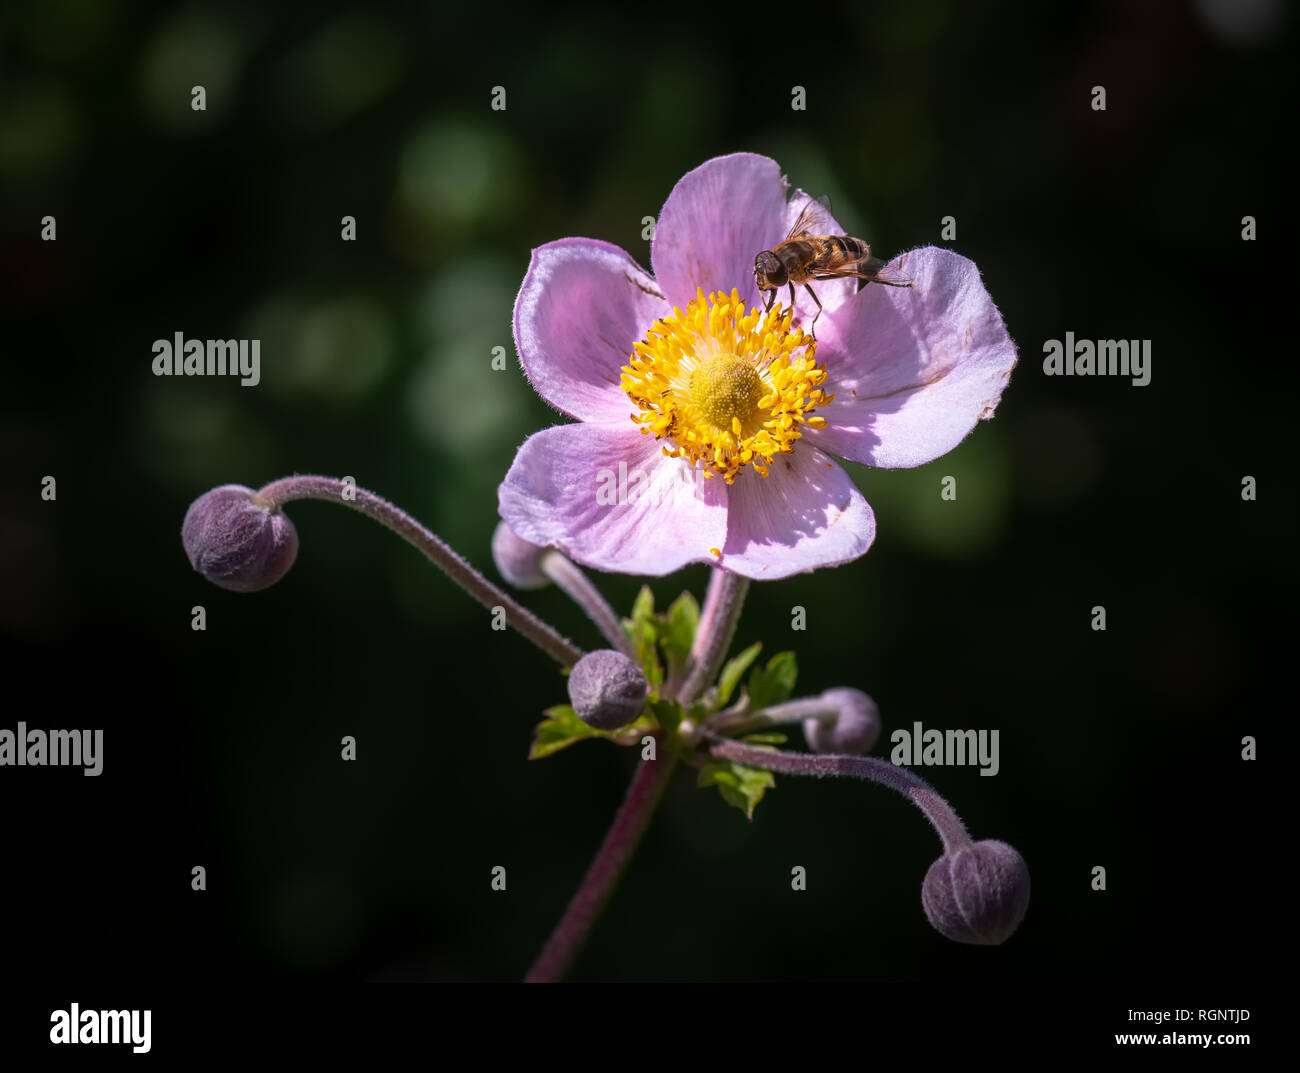 Color outdoor floral image of a single isolated blooming intense pink autumn anemone with buds taken on a sunny summer day with natural blurred back Stock Photo